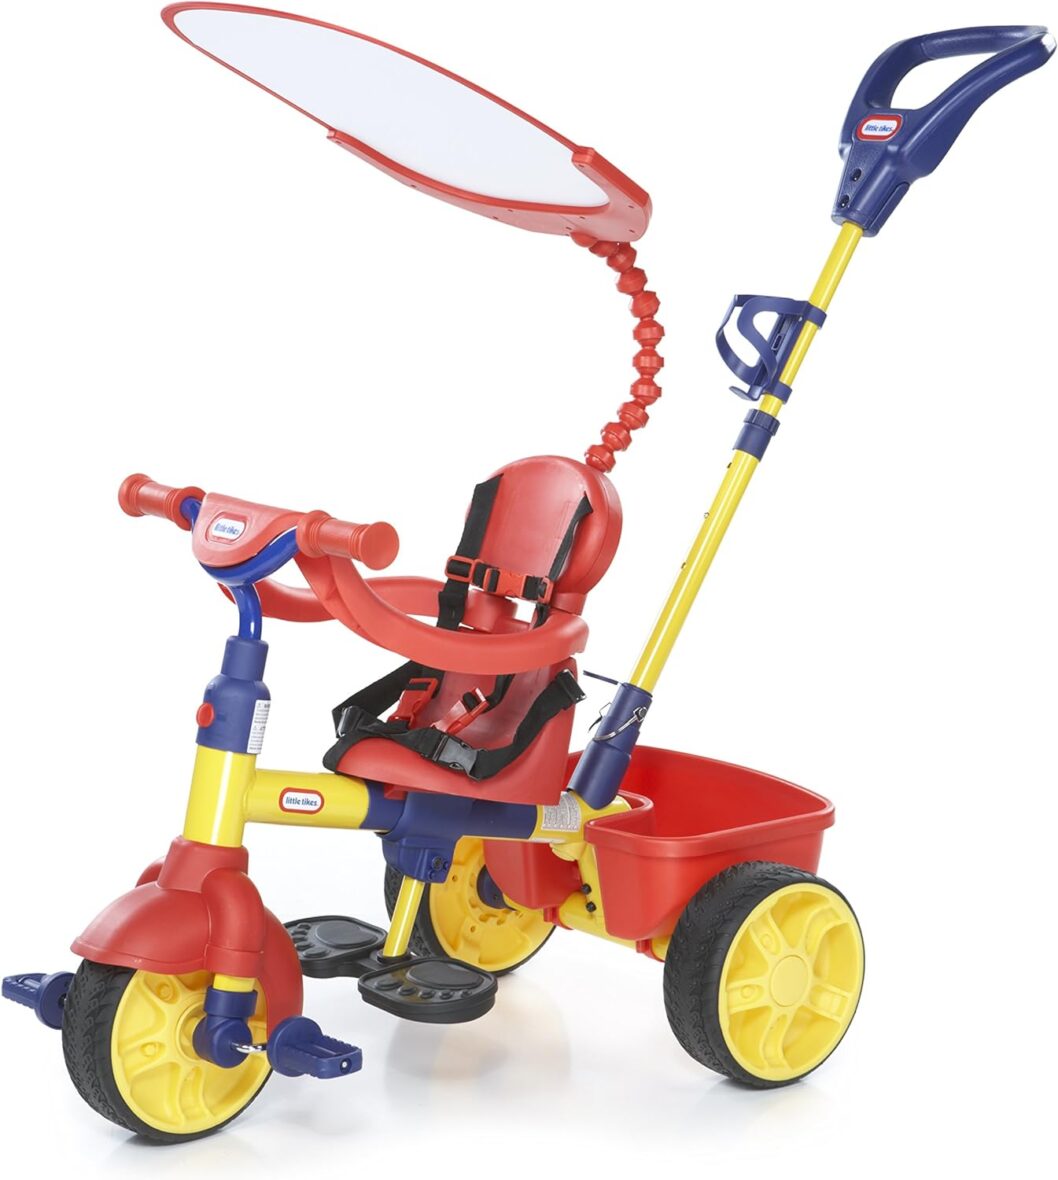 Little Tikes 4-in-1 tricycle